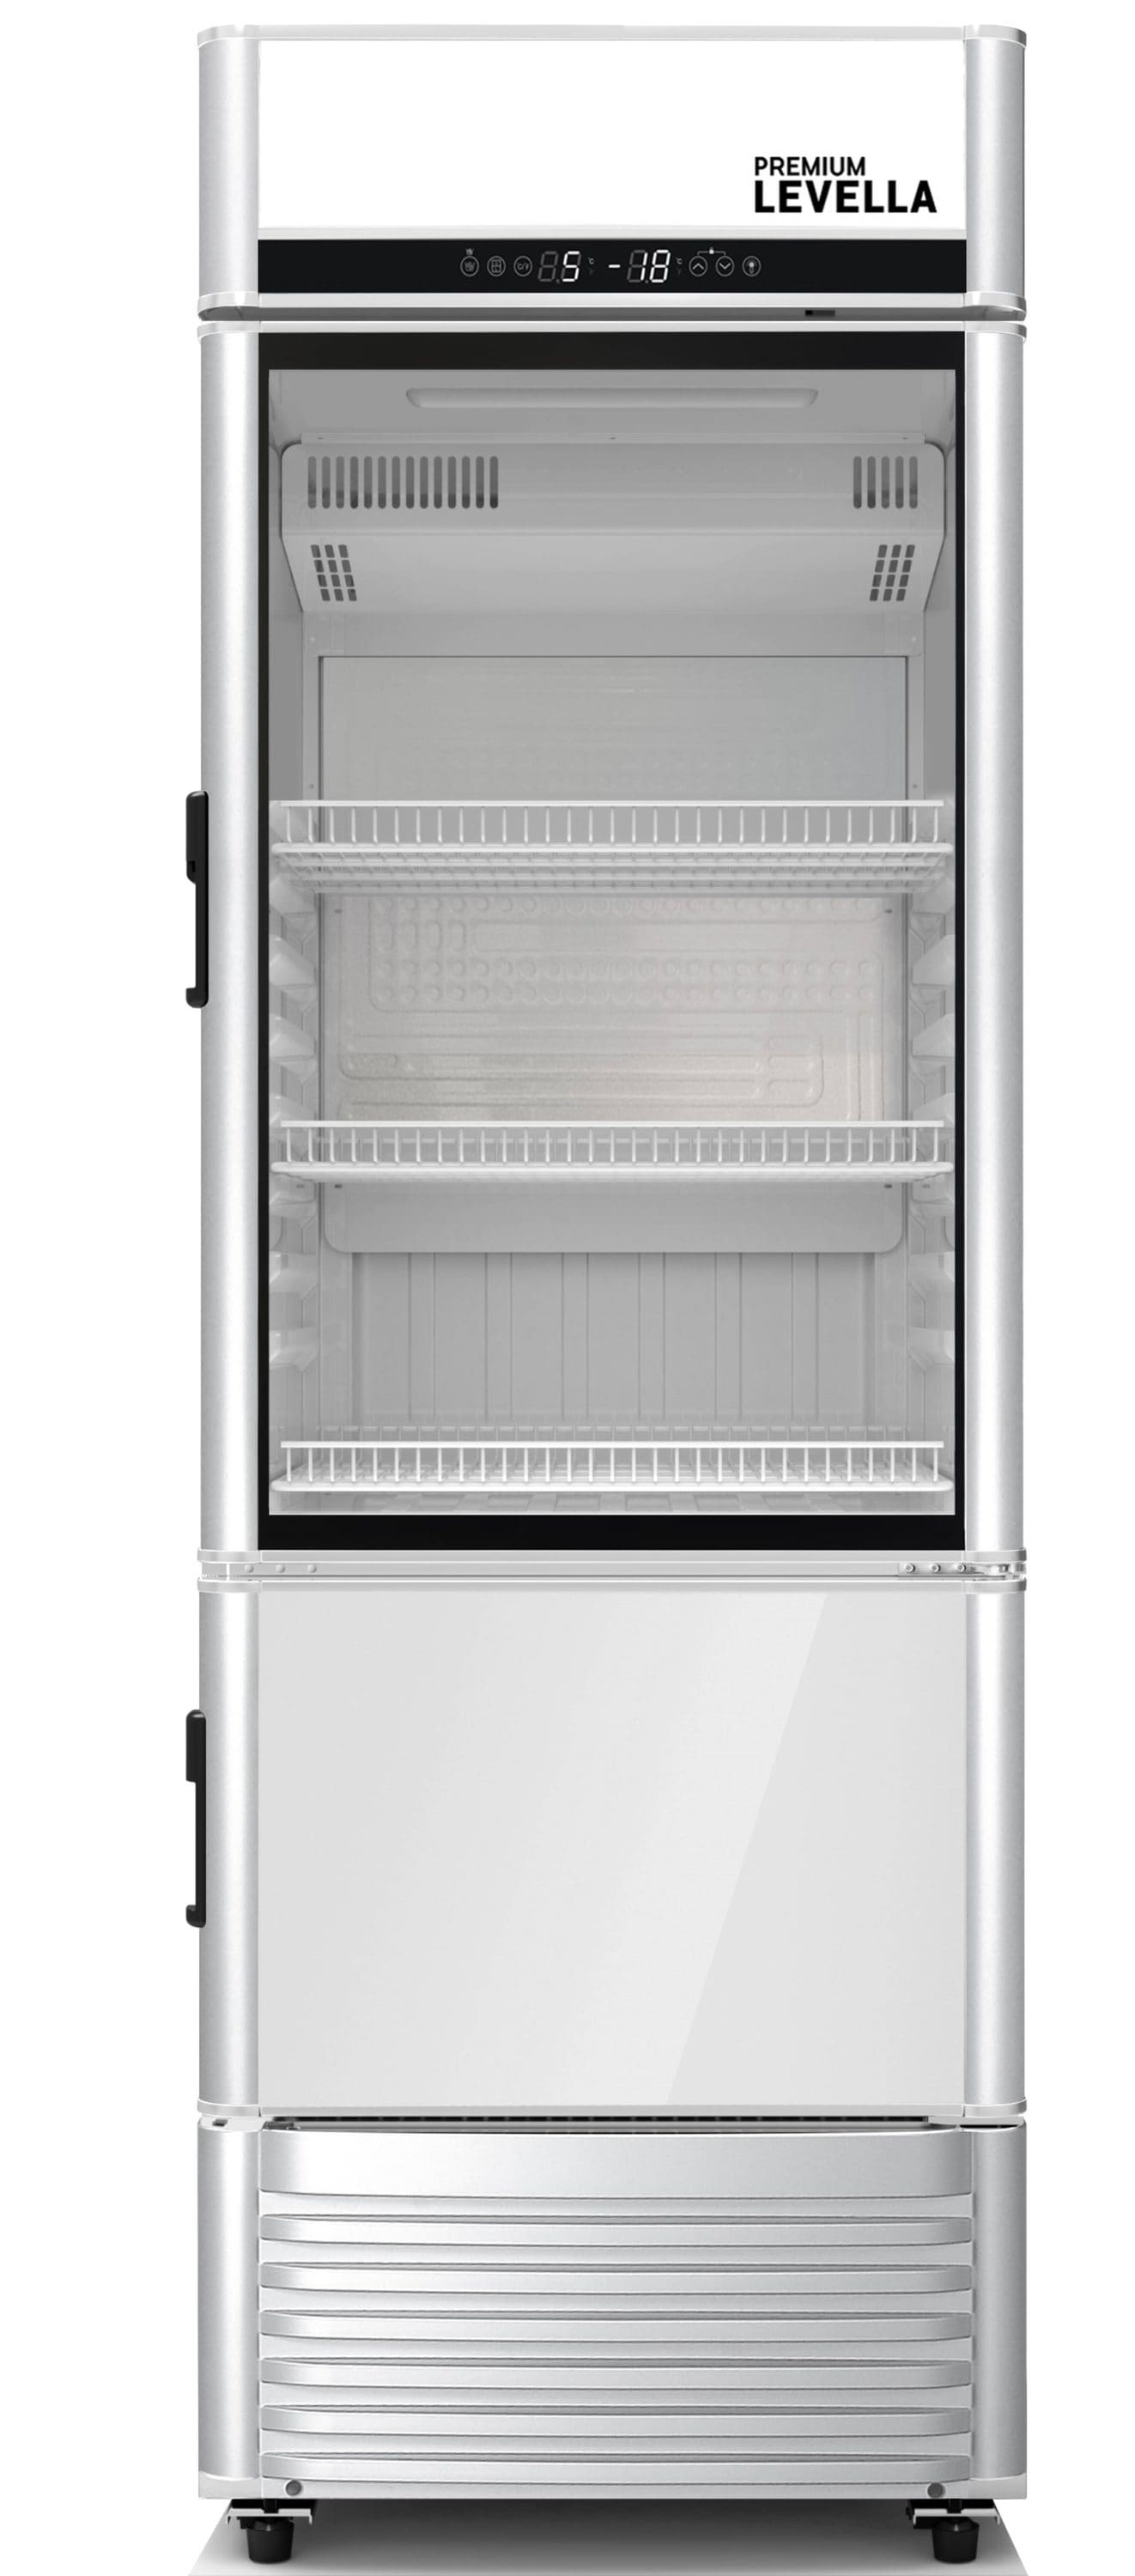 FCRS181RQB in Black/stainless by Frigidaire Commercial in McCook, NE -  Frigidaire Commercial 17.9 Cu. Ft., Food Service Grade, Refrigerator